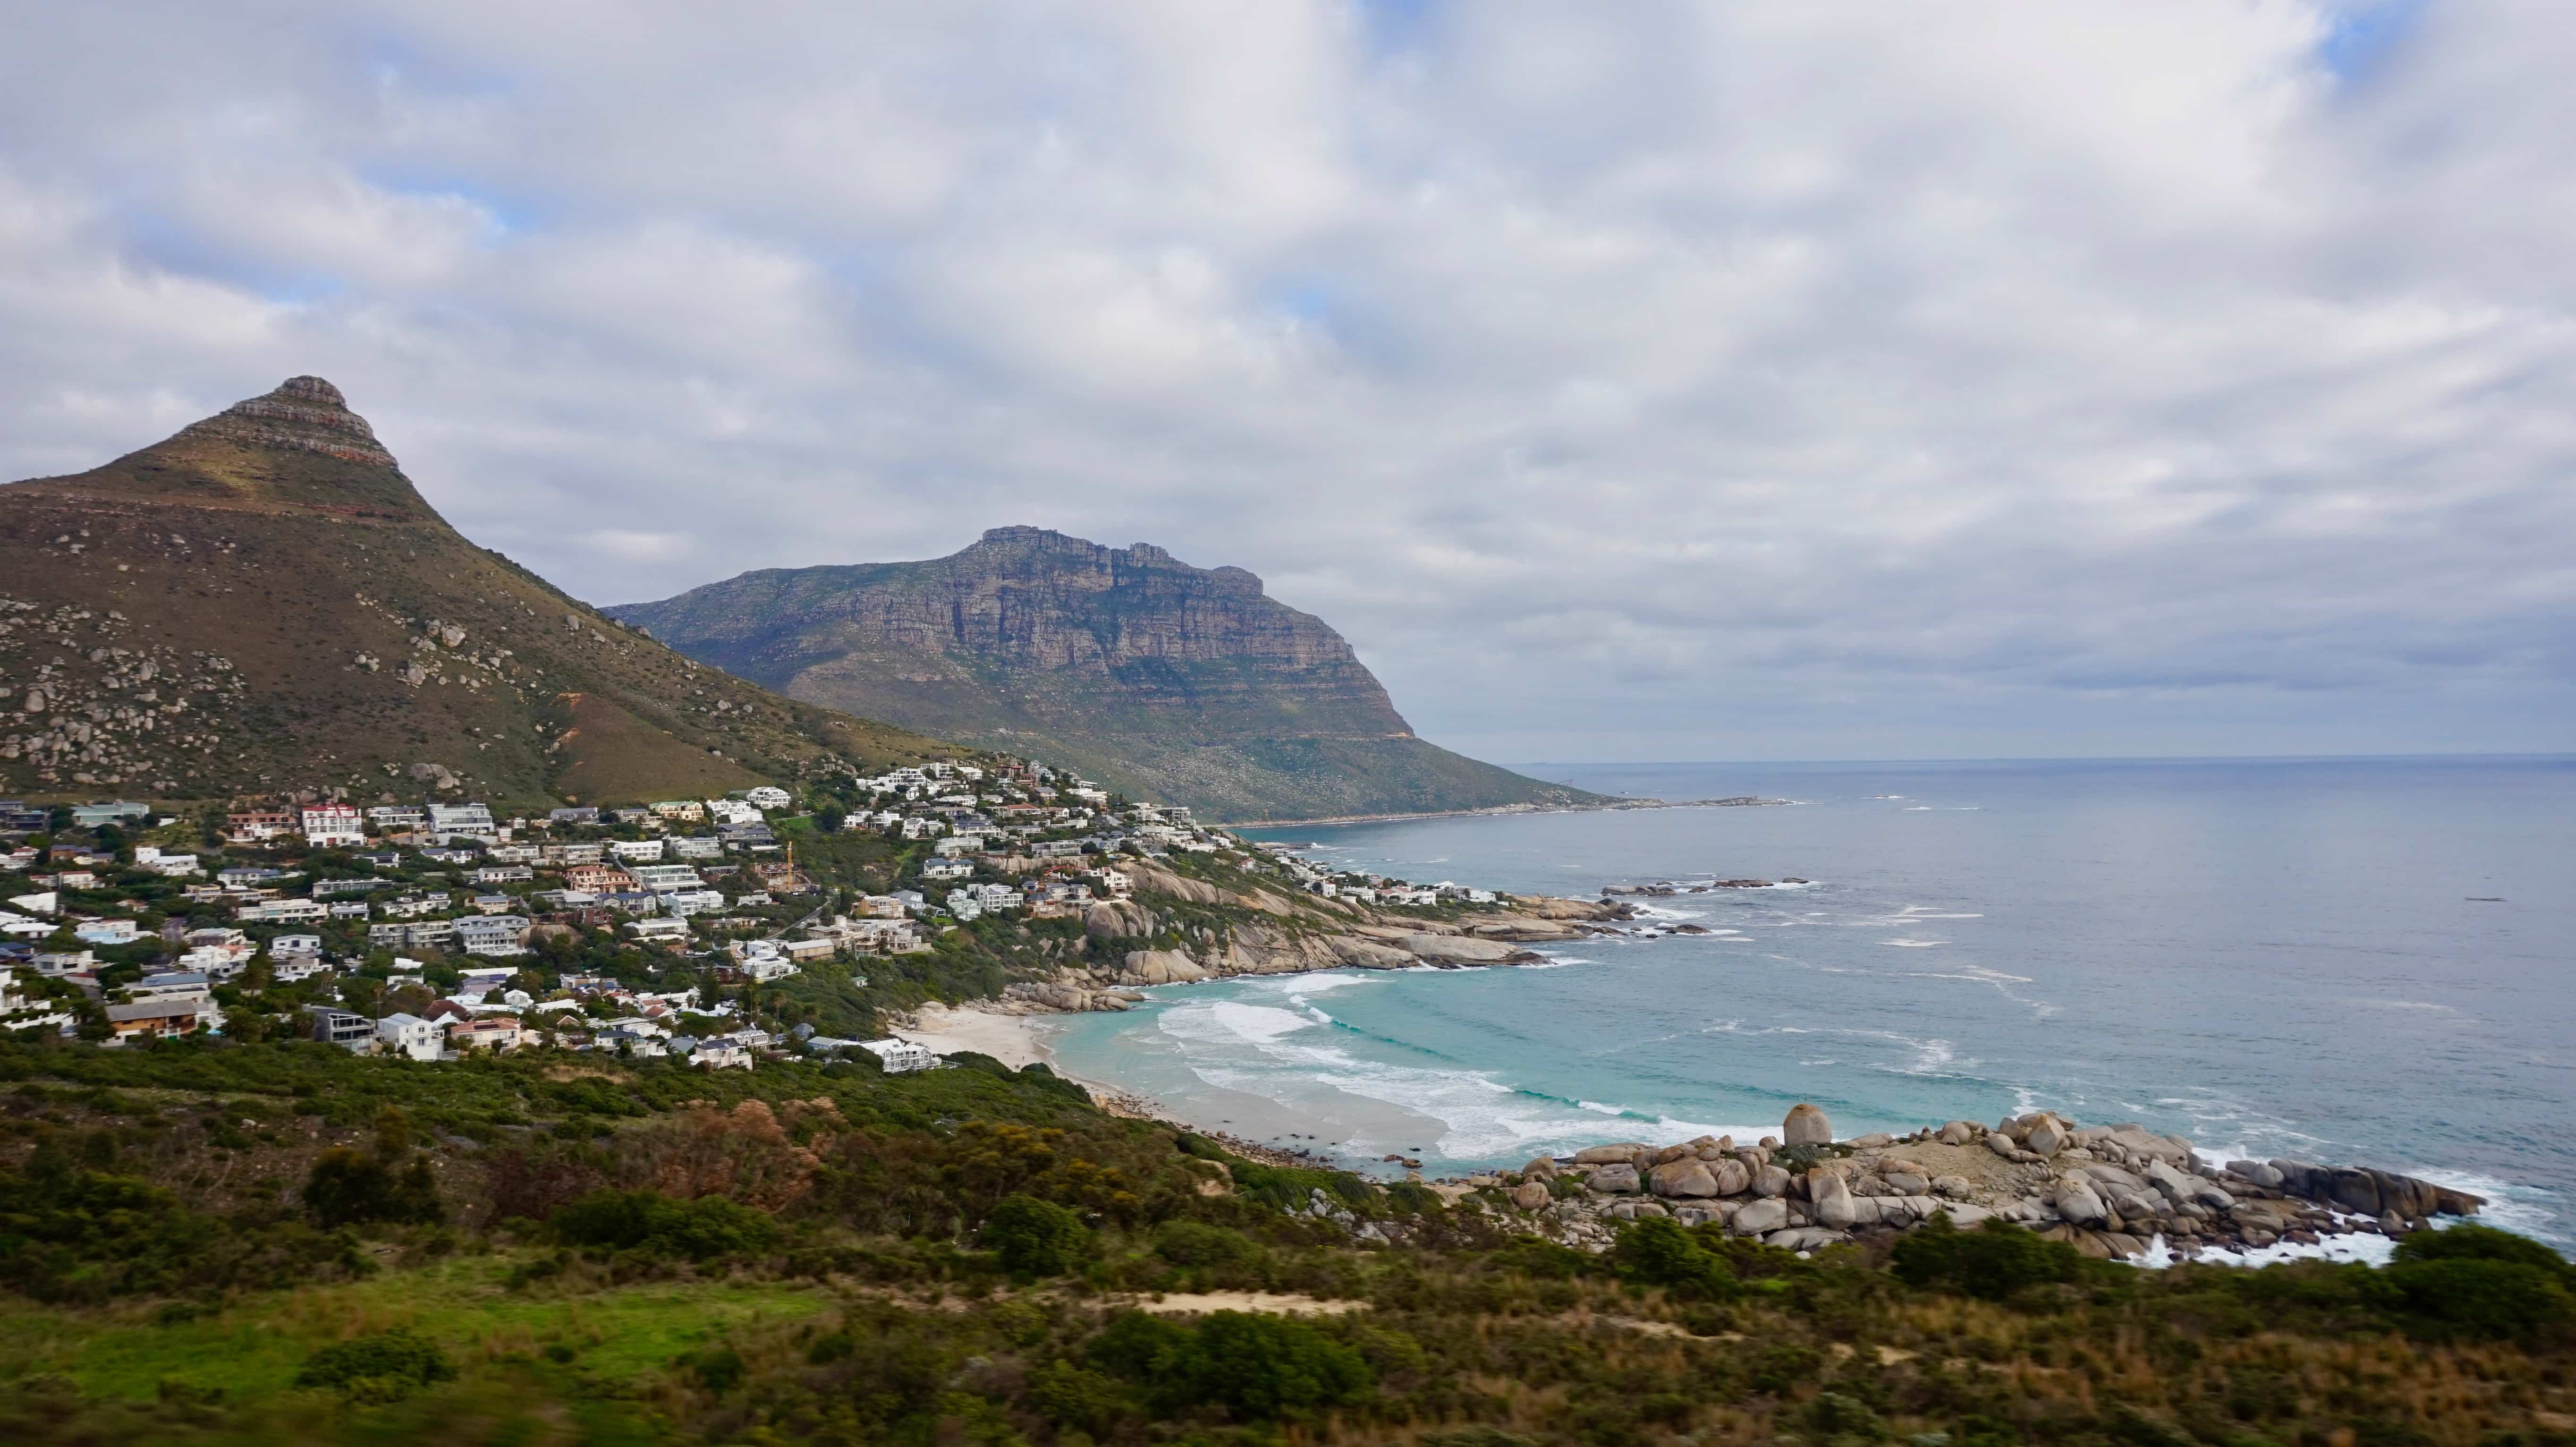 View of Lion's Head and the 12 Apostles Mountain Range in Cape Town